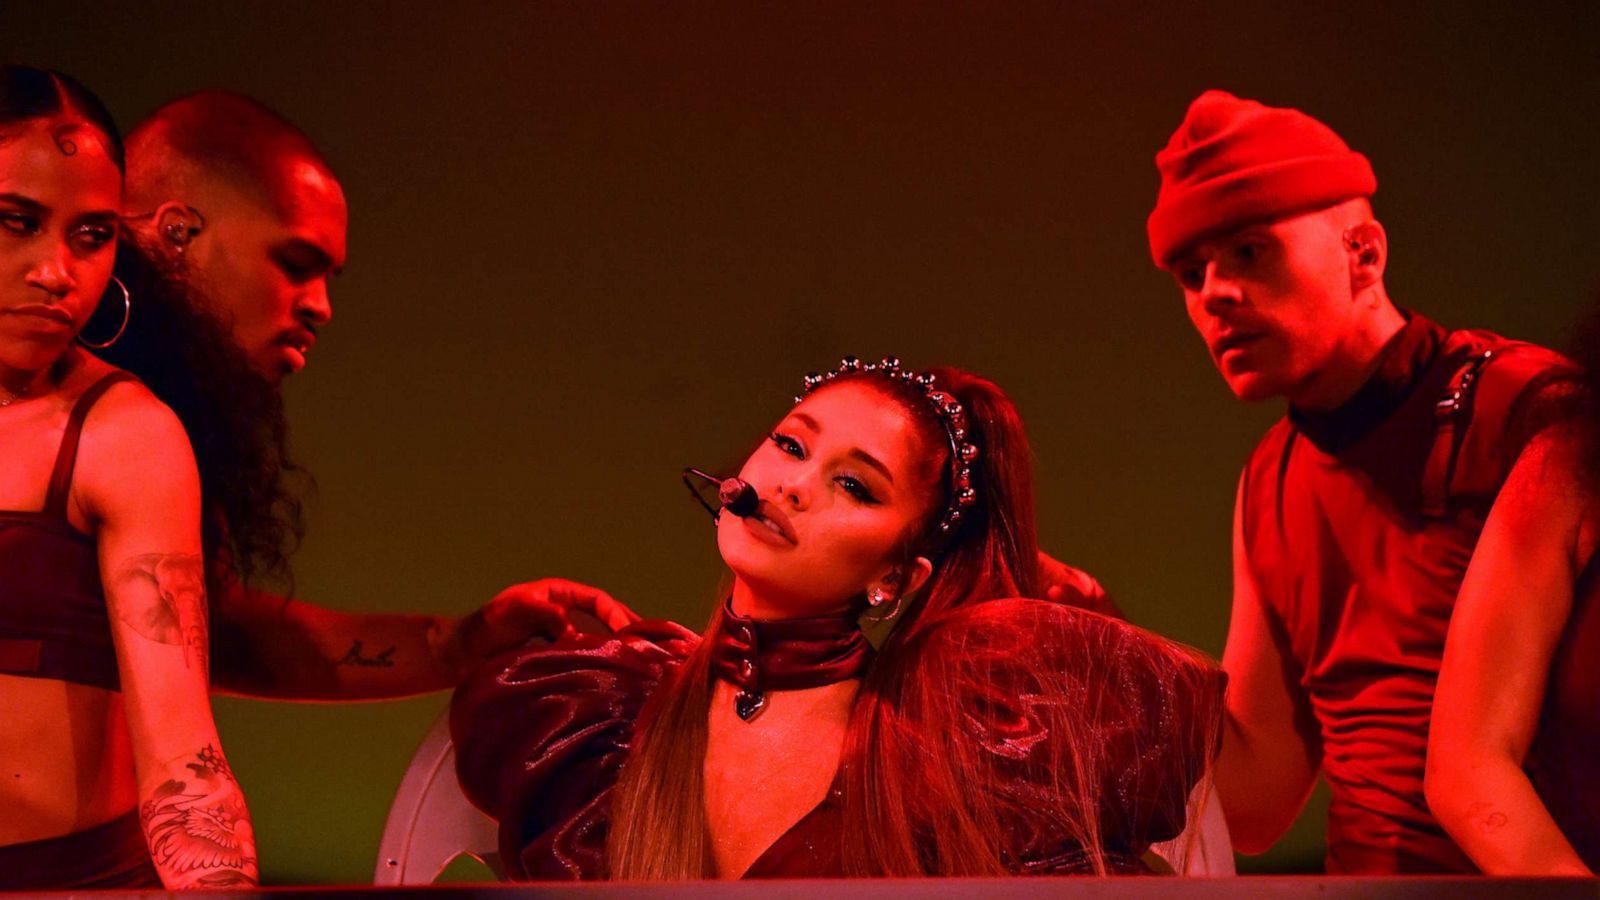 Ariana Grande shares mental health update after tearful concert